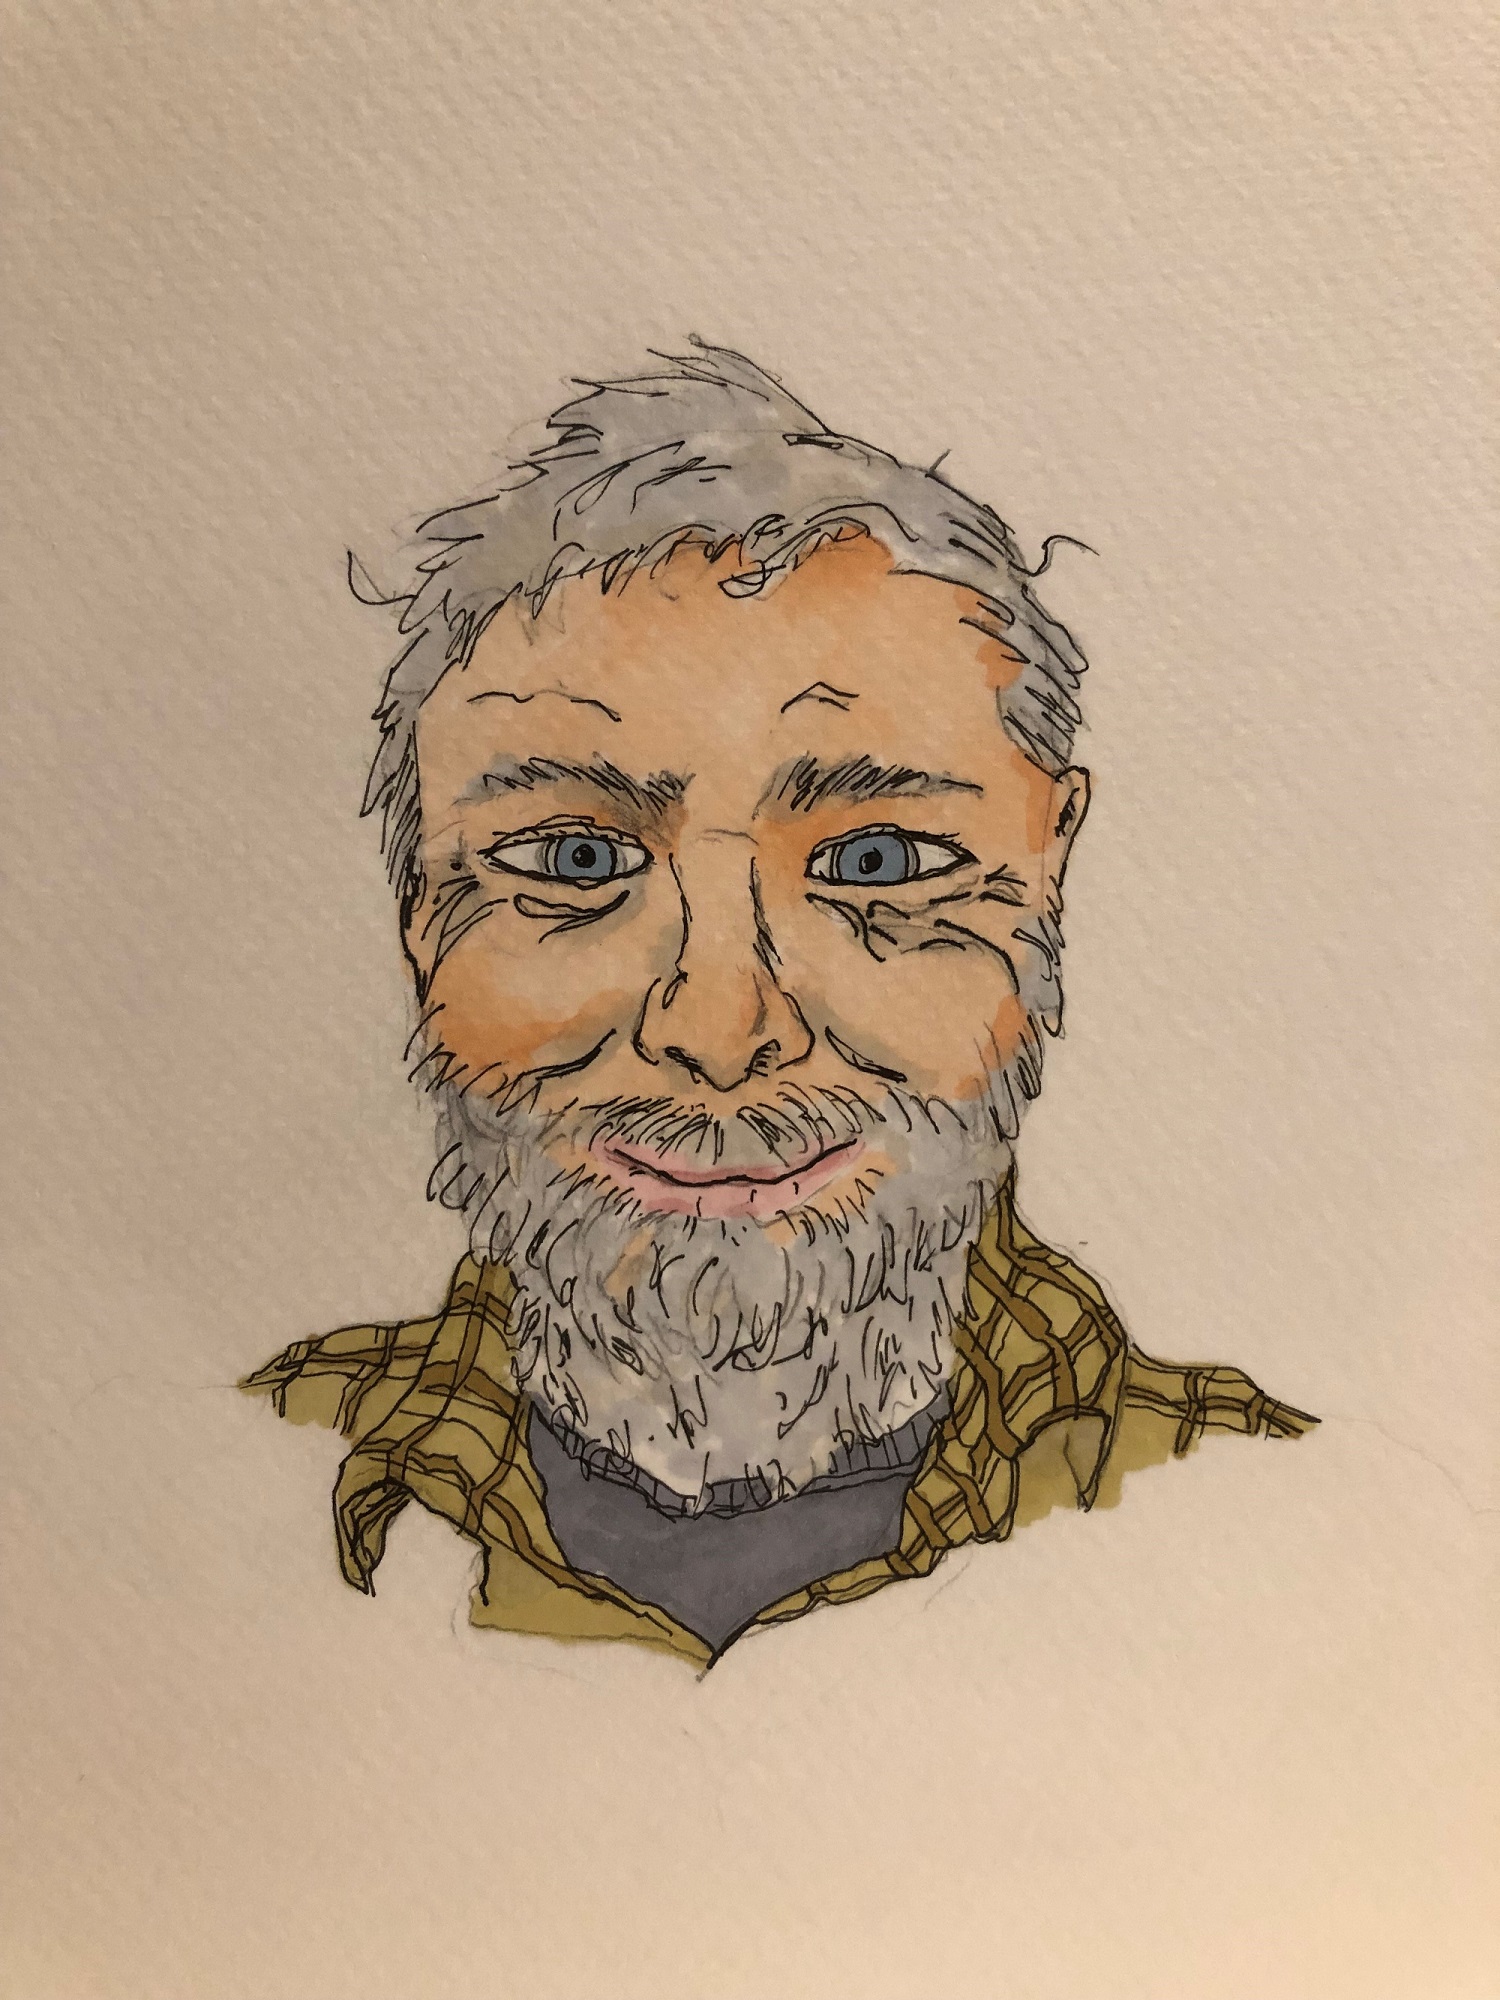 Ian Cunliffe self-portrait sketch. This color pen and ink sketch depicts a white man with blue eyes, short grey hair, and a grey beard. He is smiling with a closed mouth.